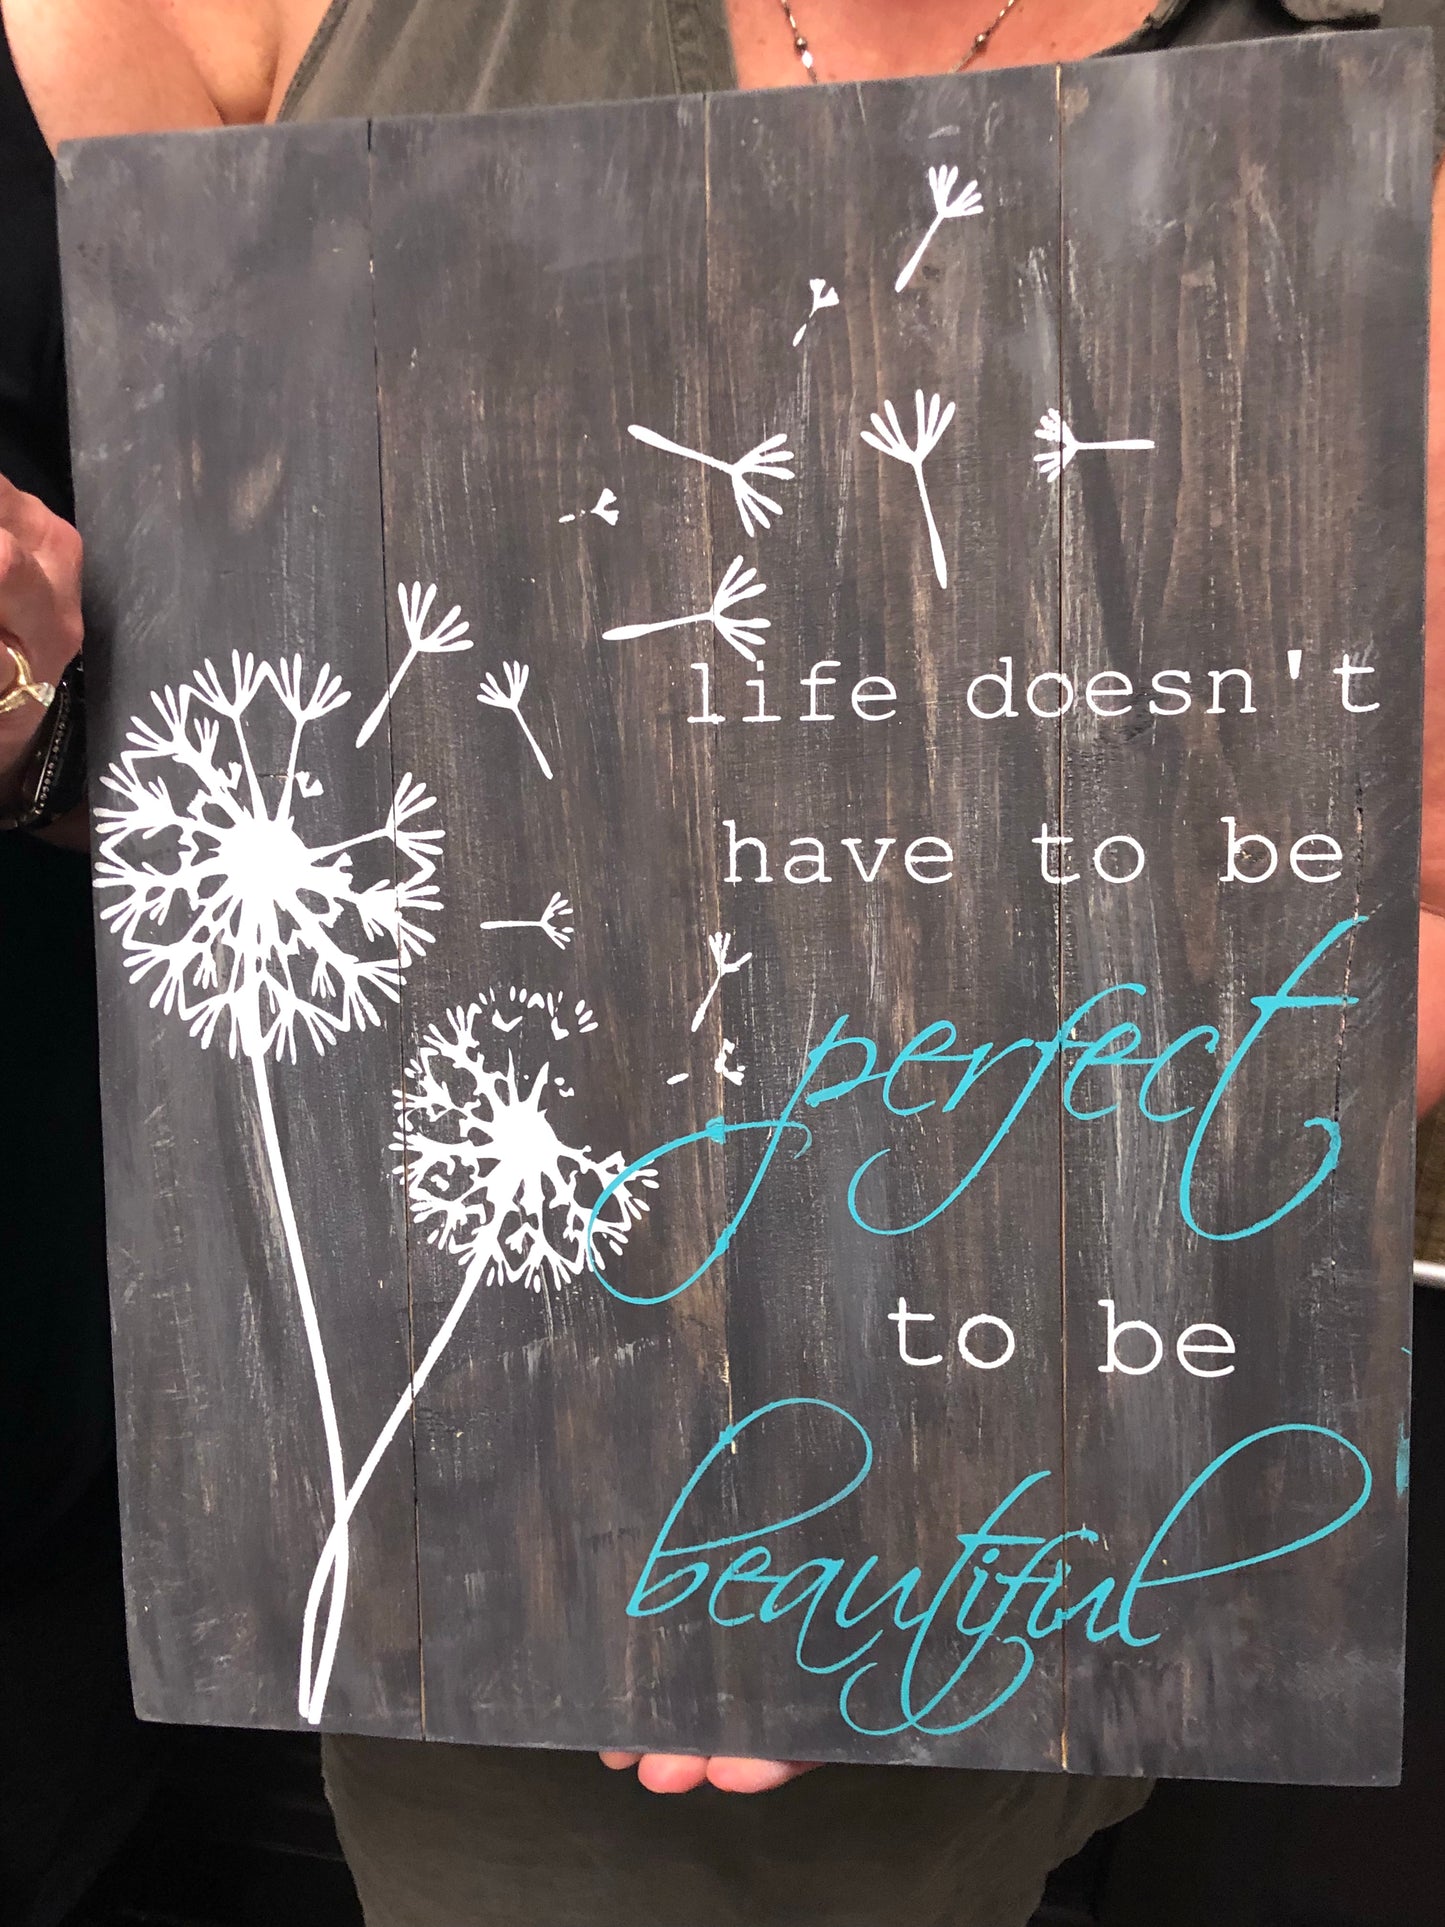 Life doesn't have to be perfect to be beautiful